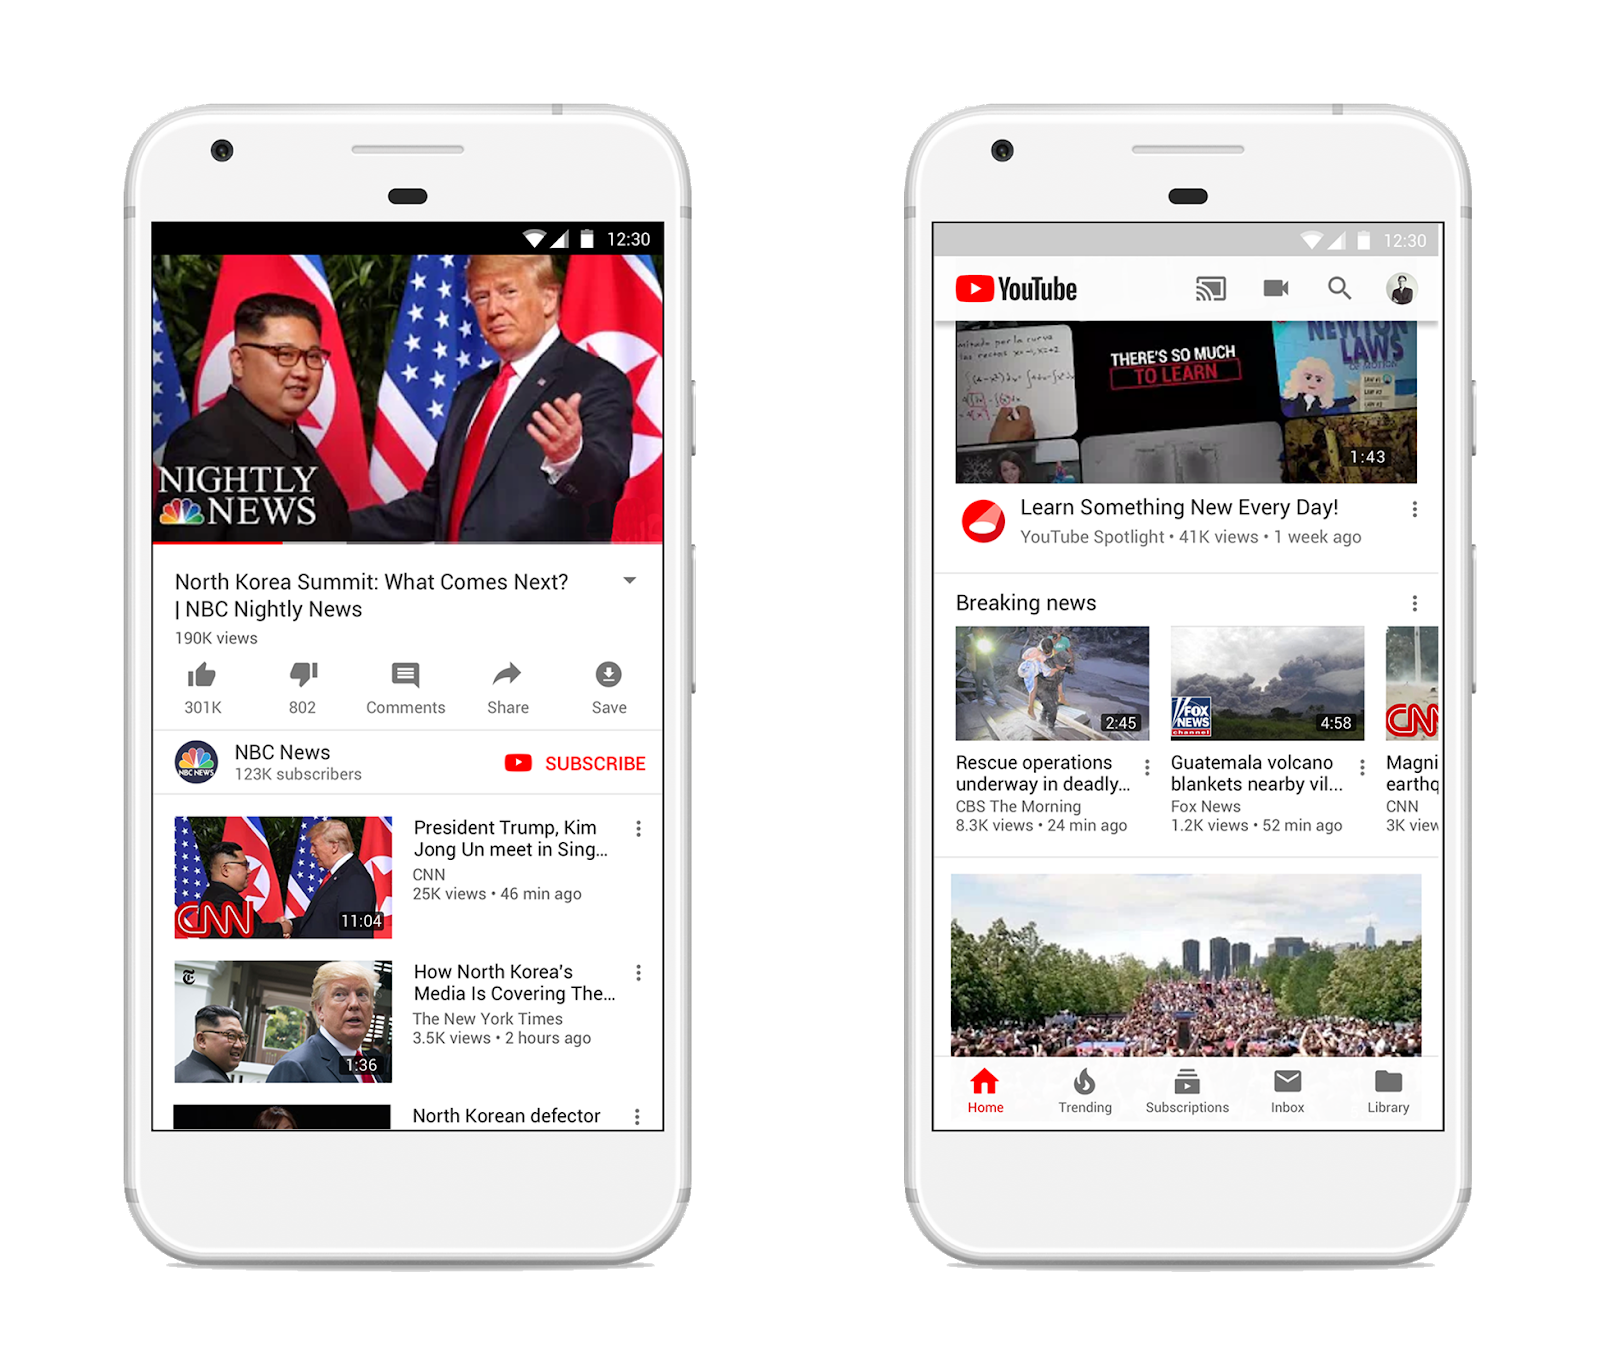 YouTube Launches New Features for a Better News Experience 2 | Digital Marketing Community